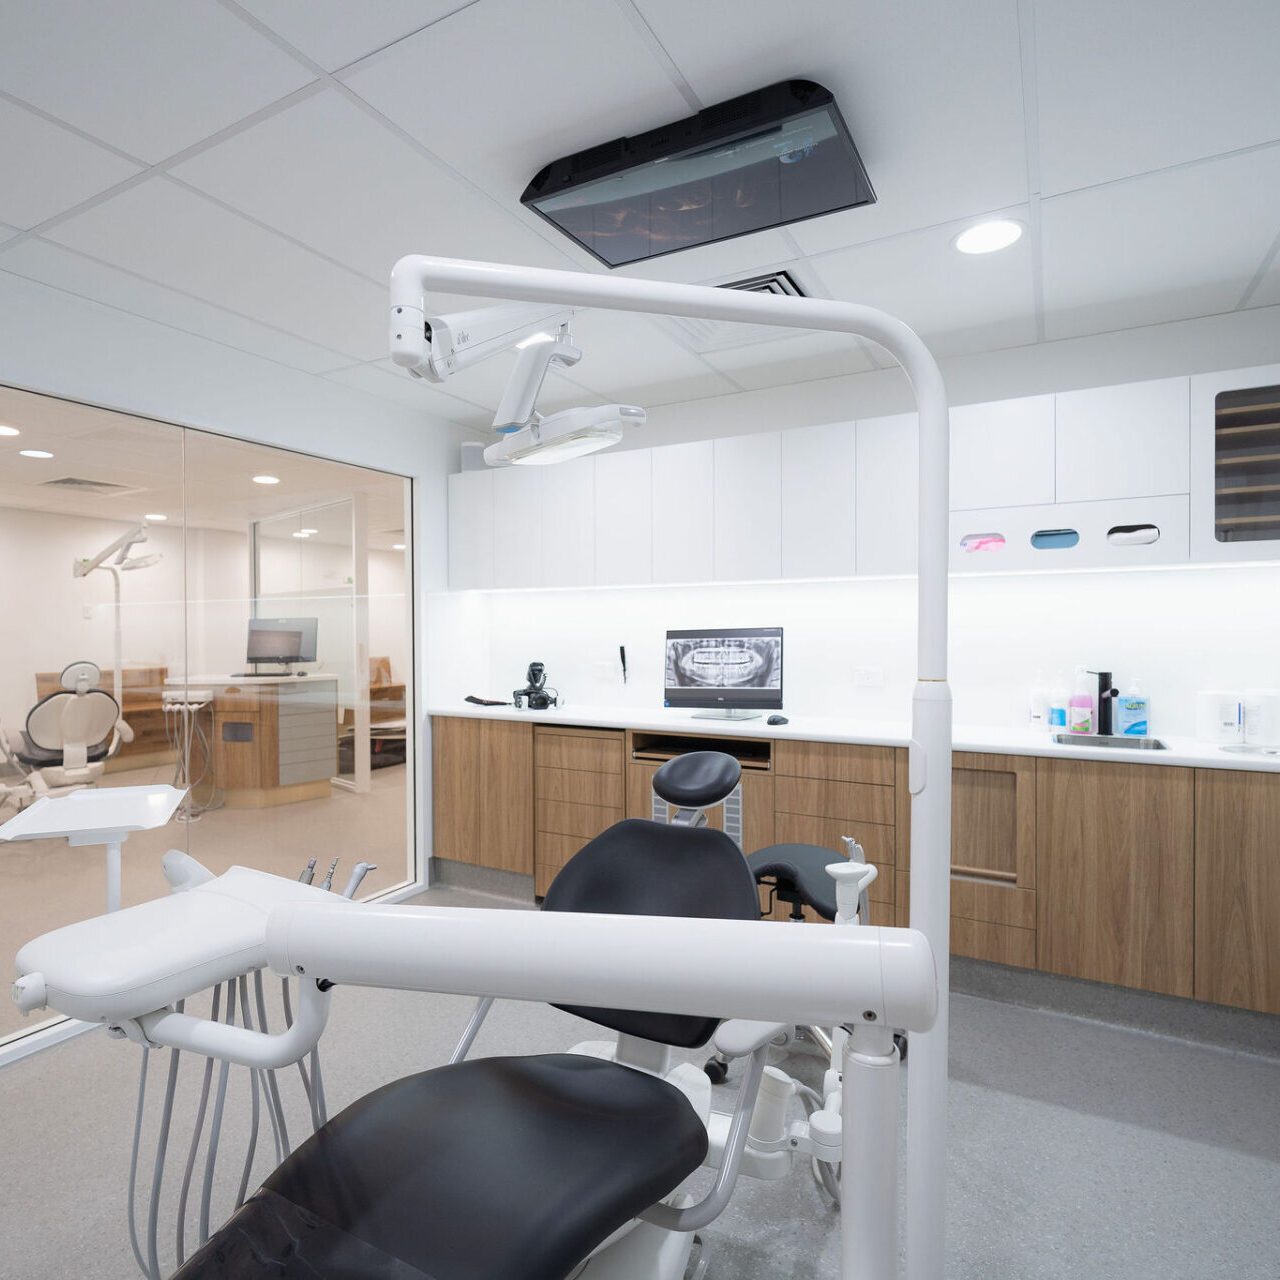 advanced technology at a Perth orthodontic clinic